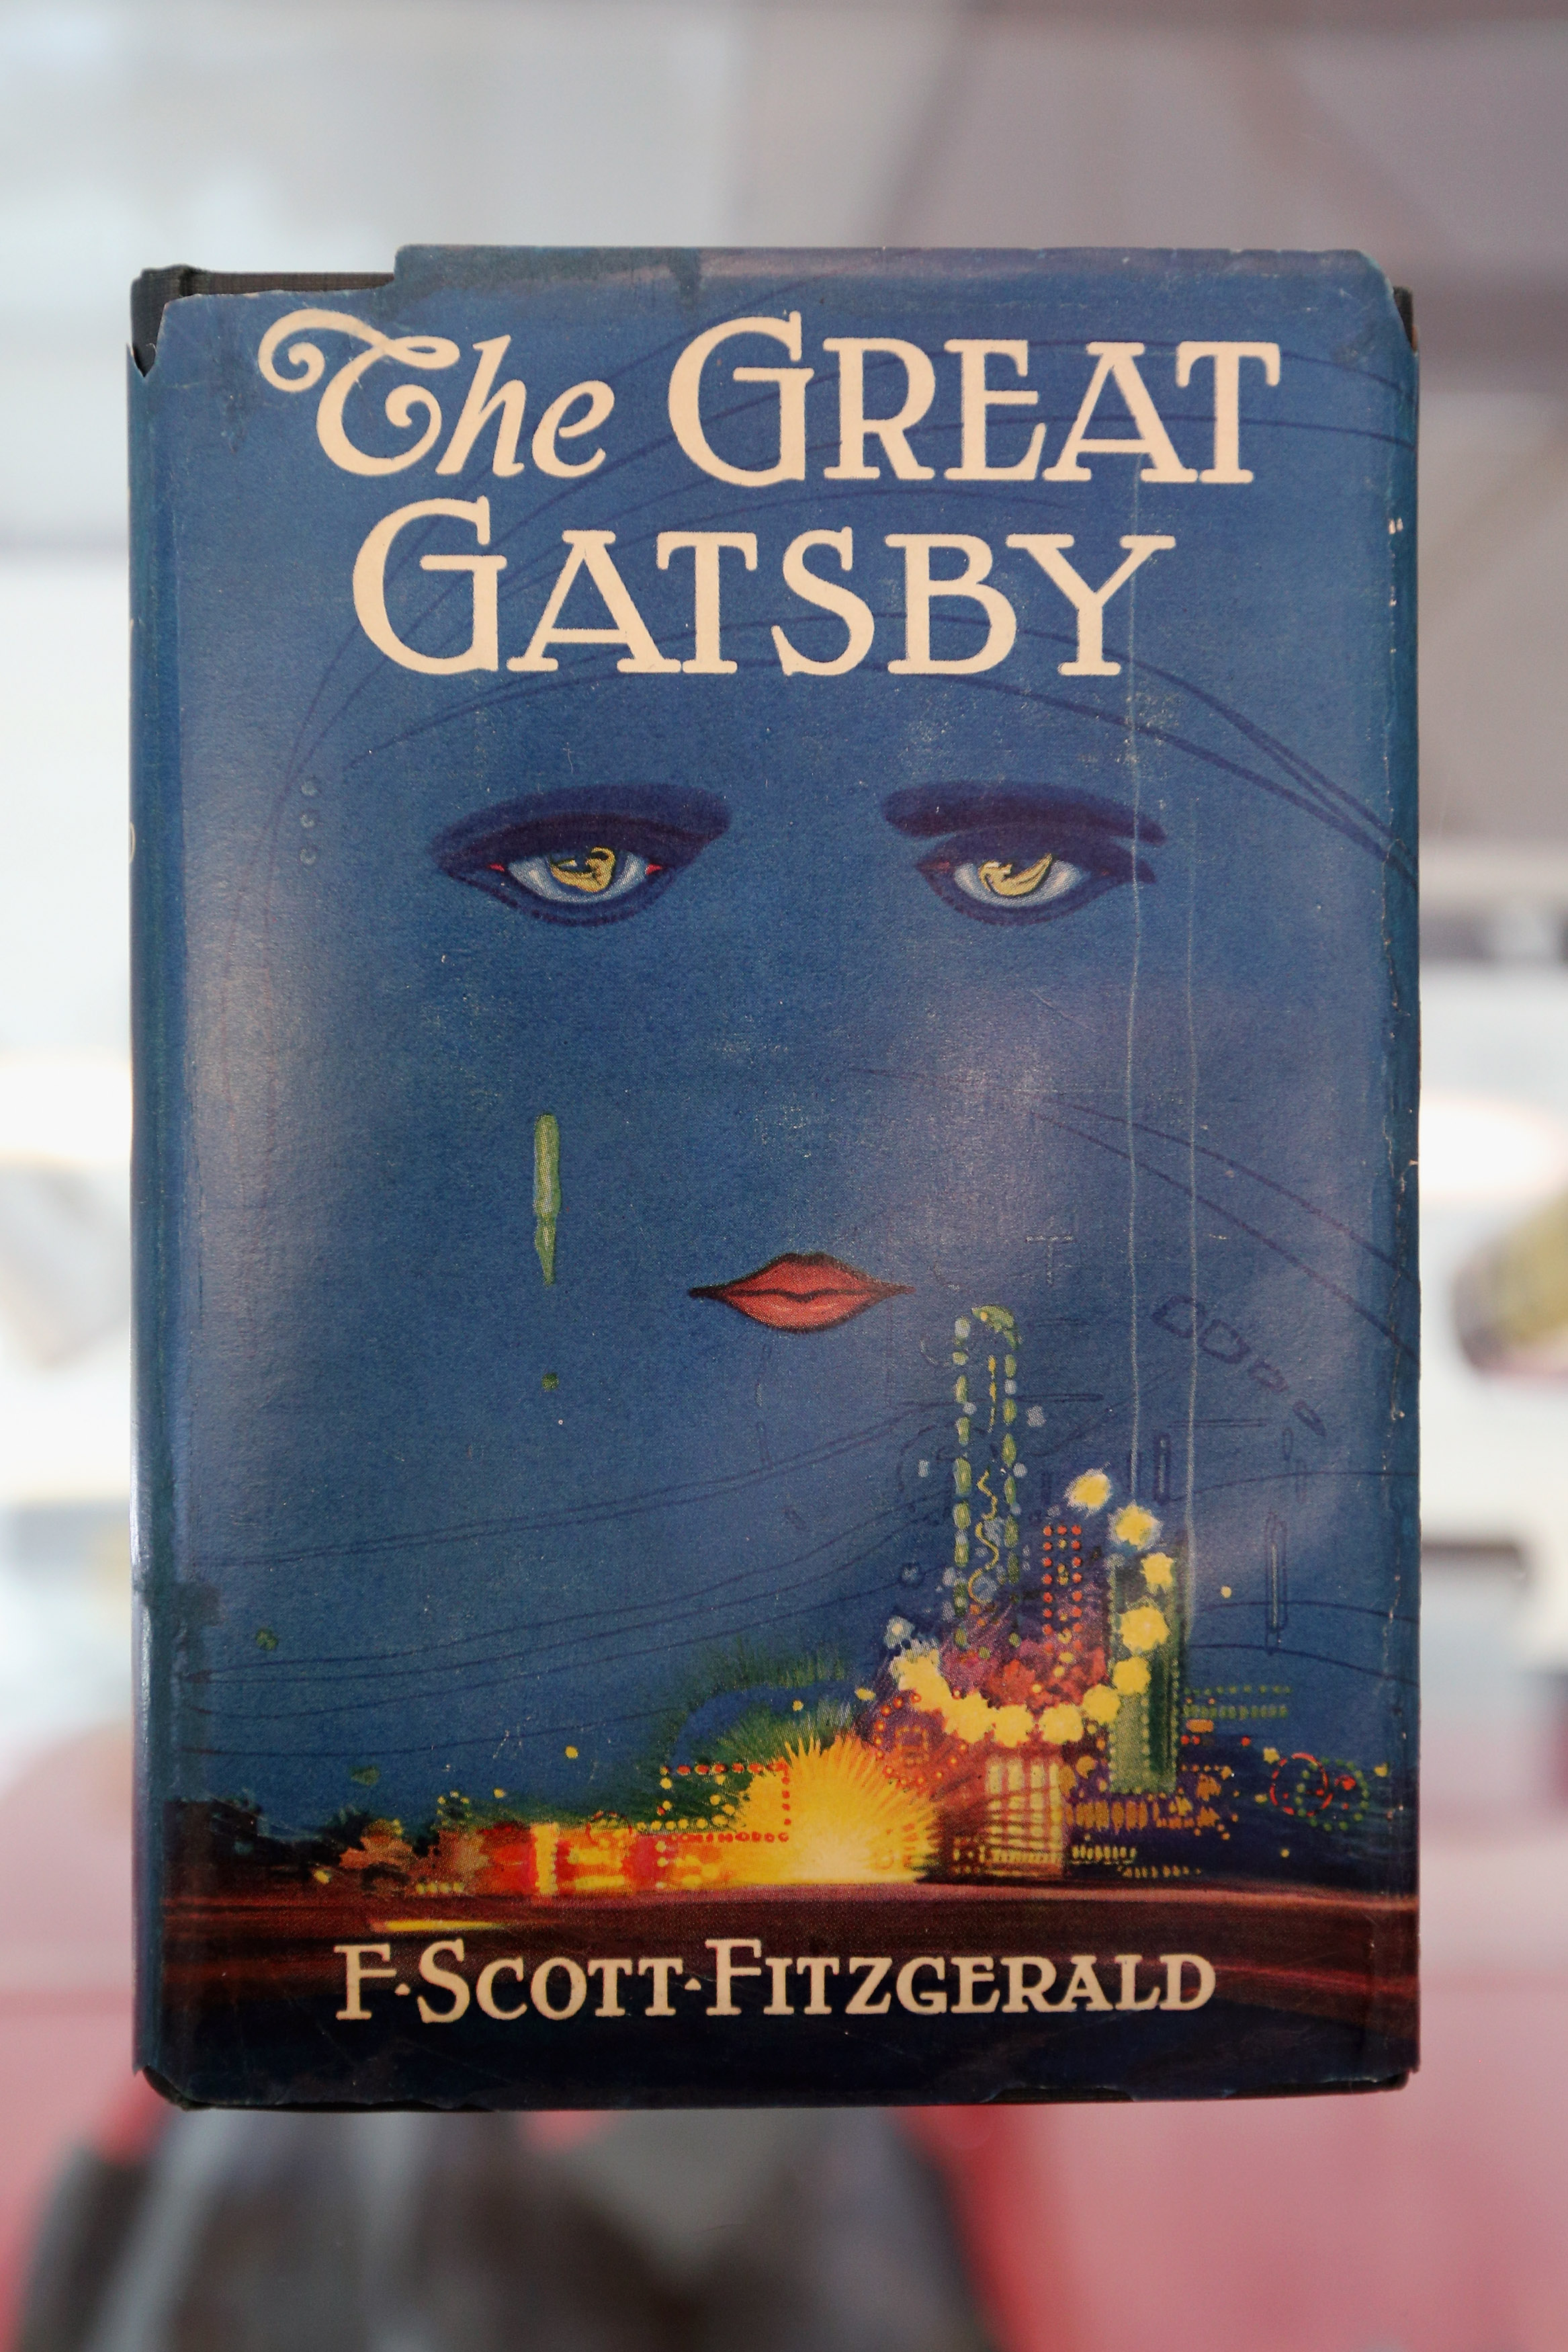 A first edition of F. Scott Fitzgerald's 'The Great Gatsby' at the London International Antiquarian Book Fair in London, England on June 13, 2013.